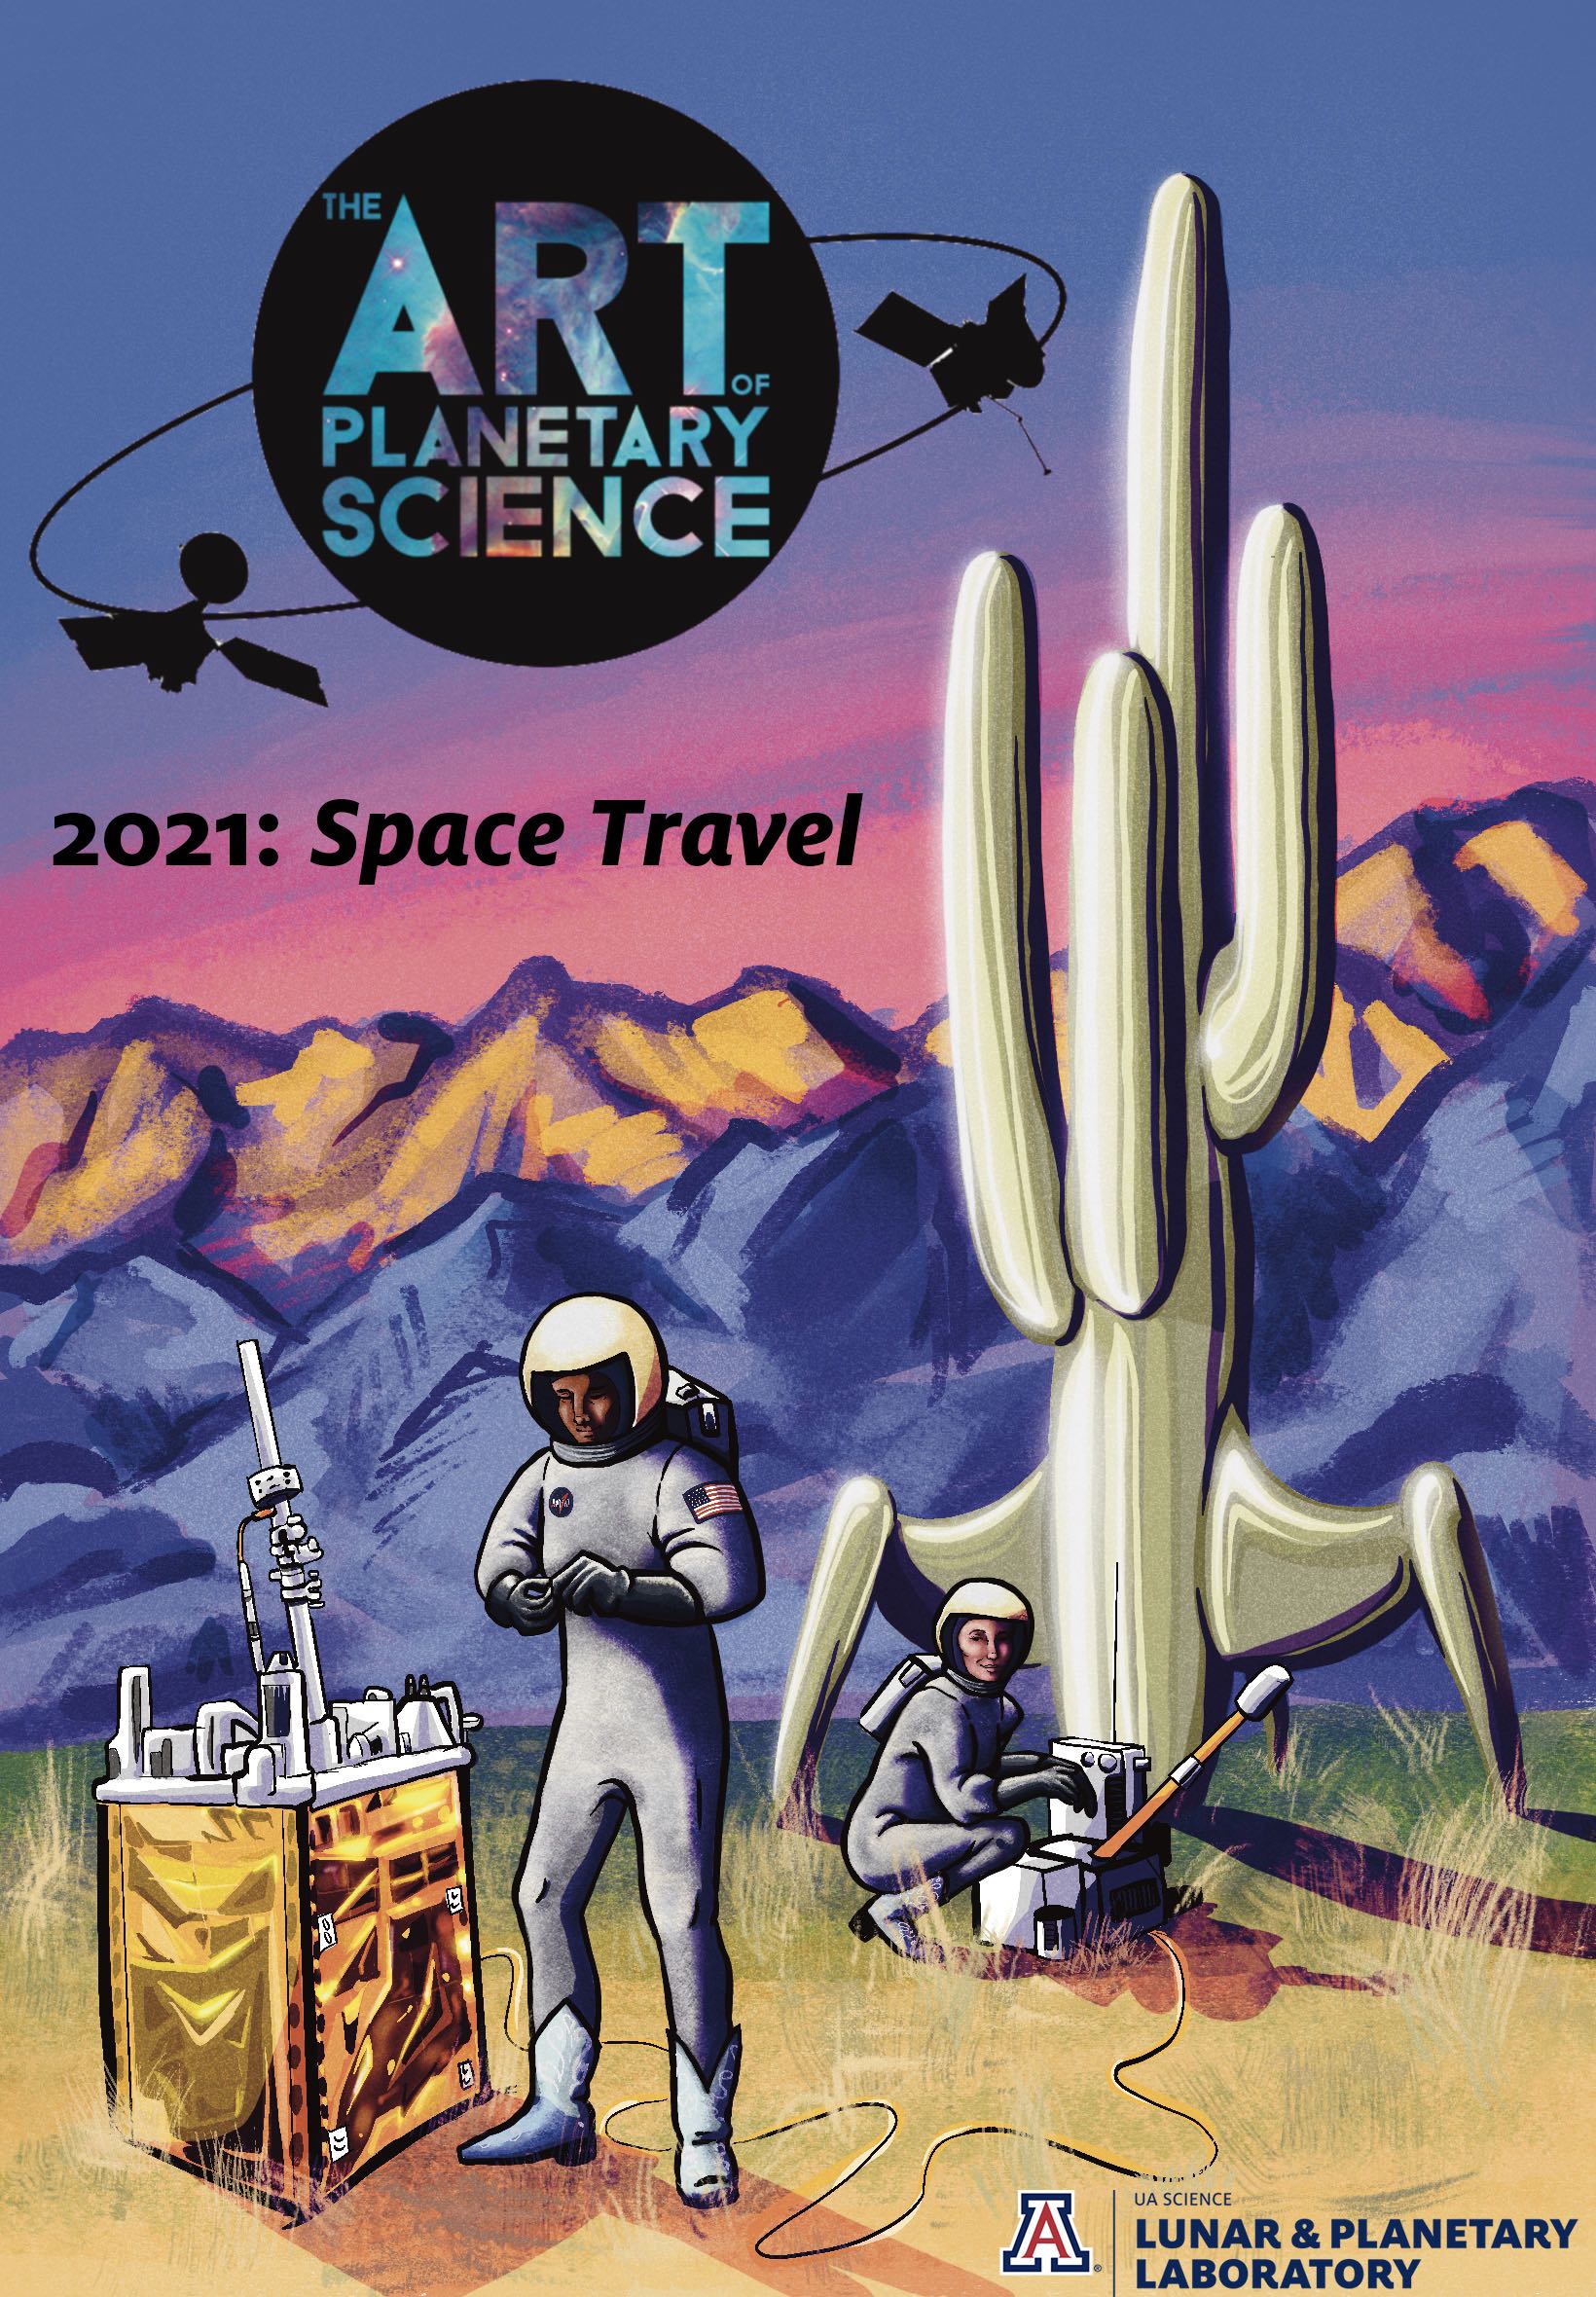 Whimsical depiction of astronauts performing experiments on a Tucson-looking landscape in front of a rocket that looks like a cactus. TAPS logo is at the top